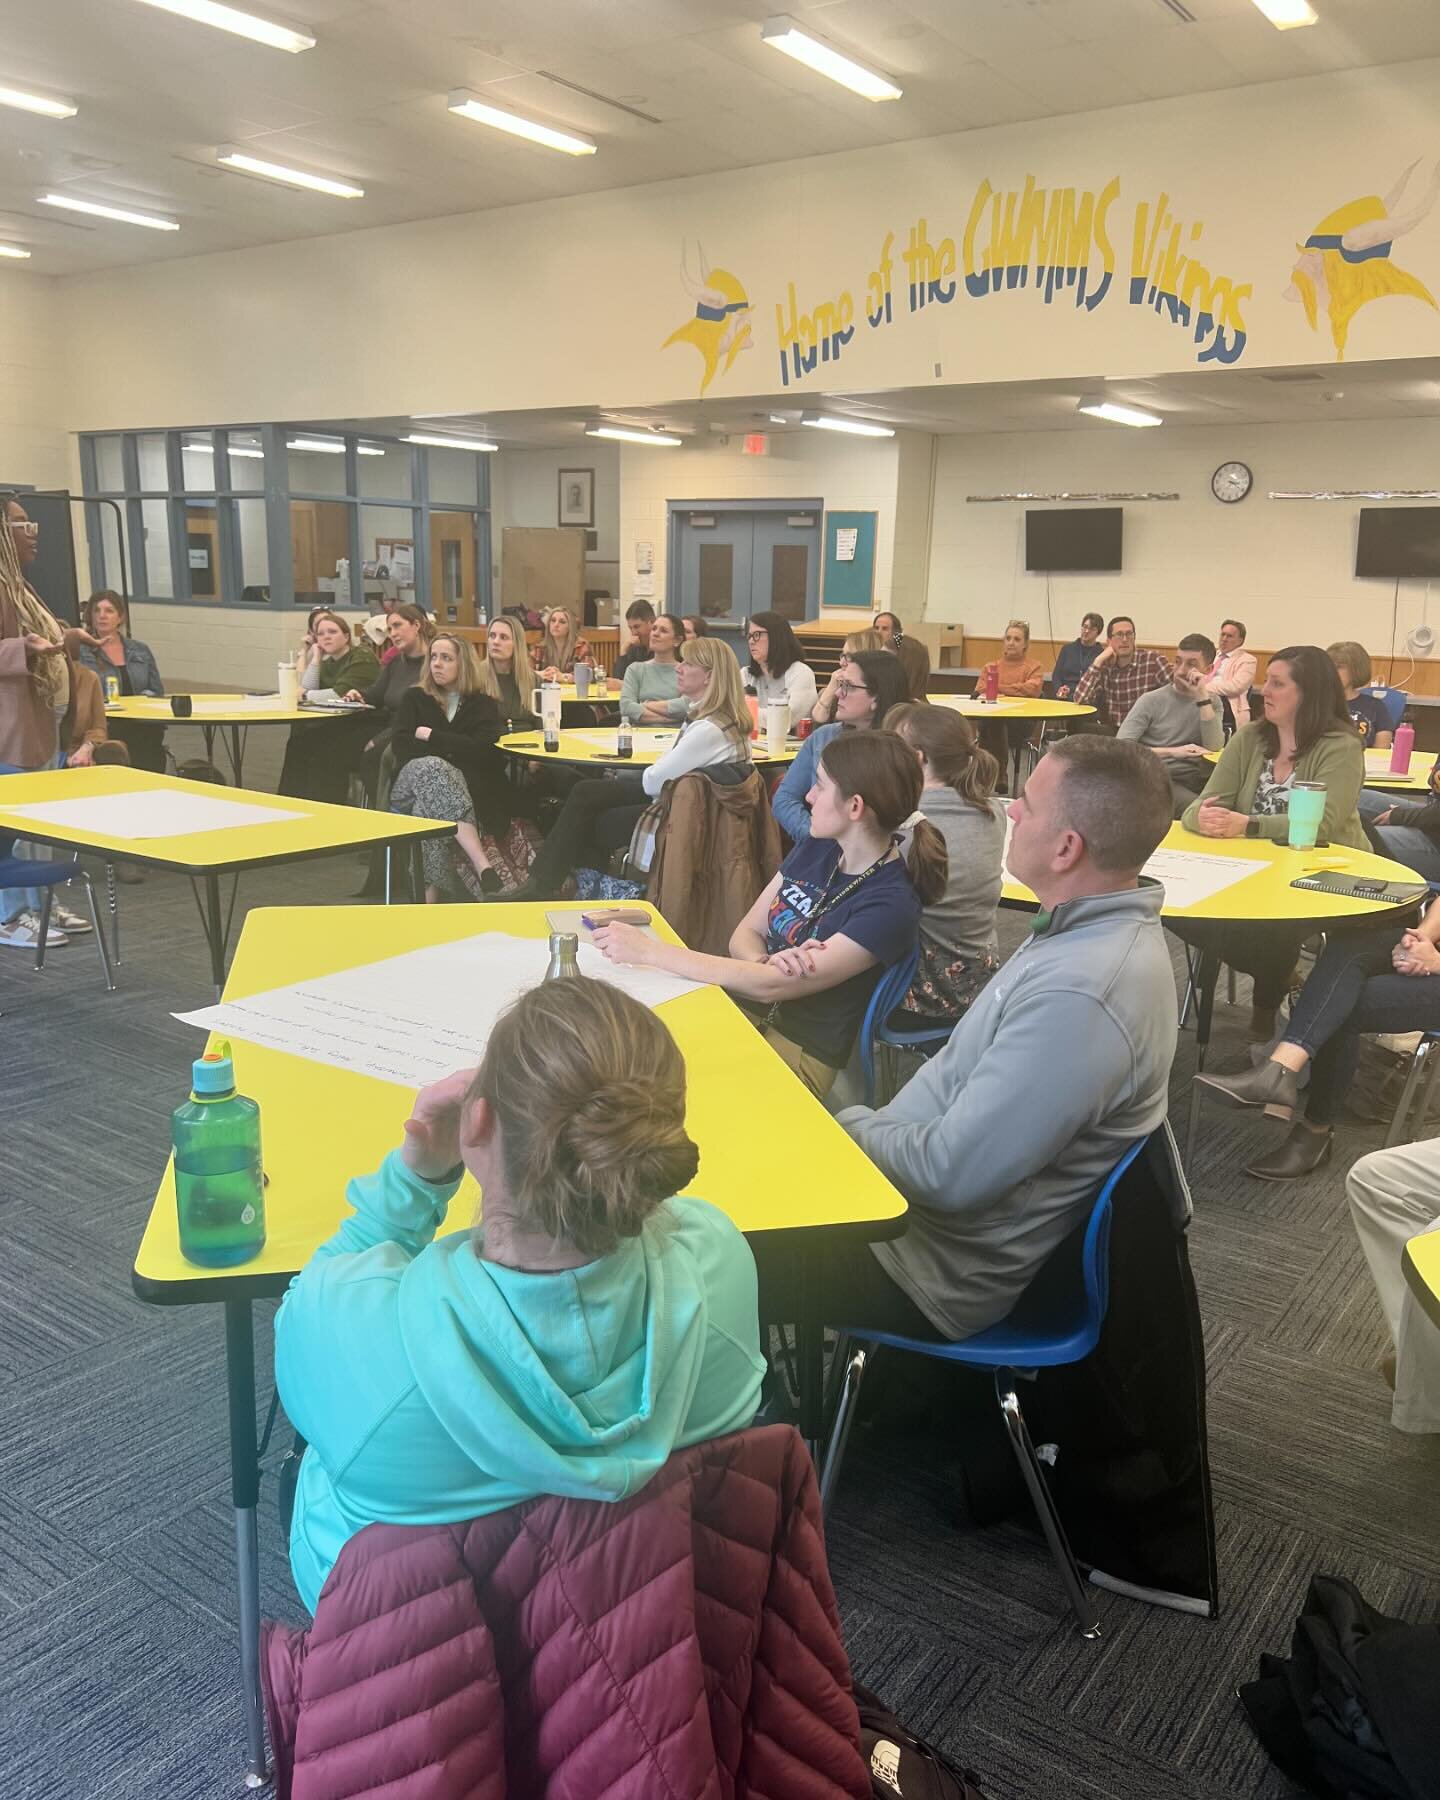 **High Five for Gordon Mitchell School! ** ✋🏻

We had an amazing time working with their staff and seeing their dedication to creating a culture of dignity! Principal Matthew Paquette and the counseling team are leading the charge, and the staff is 